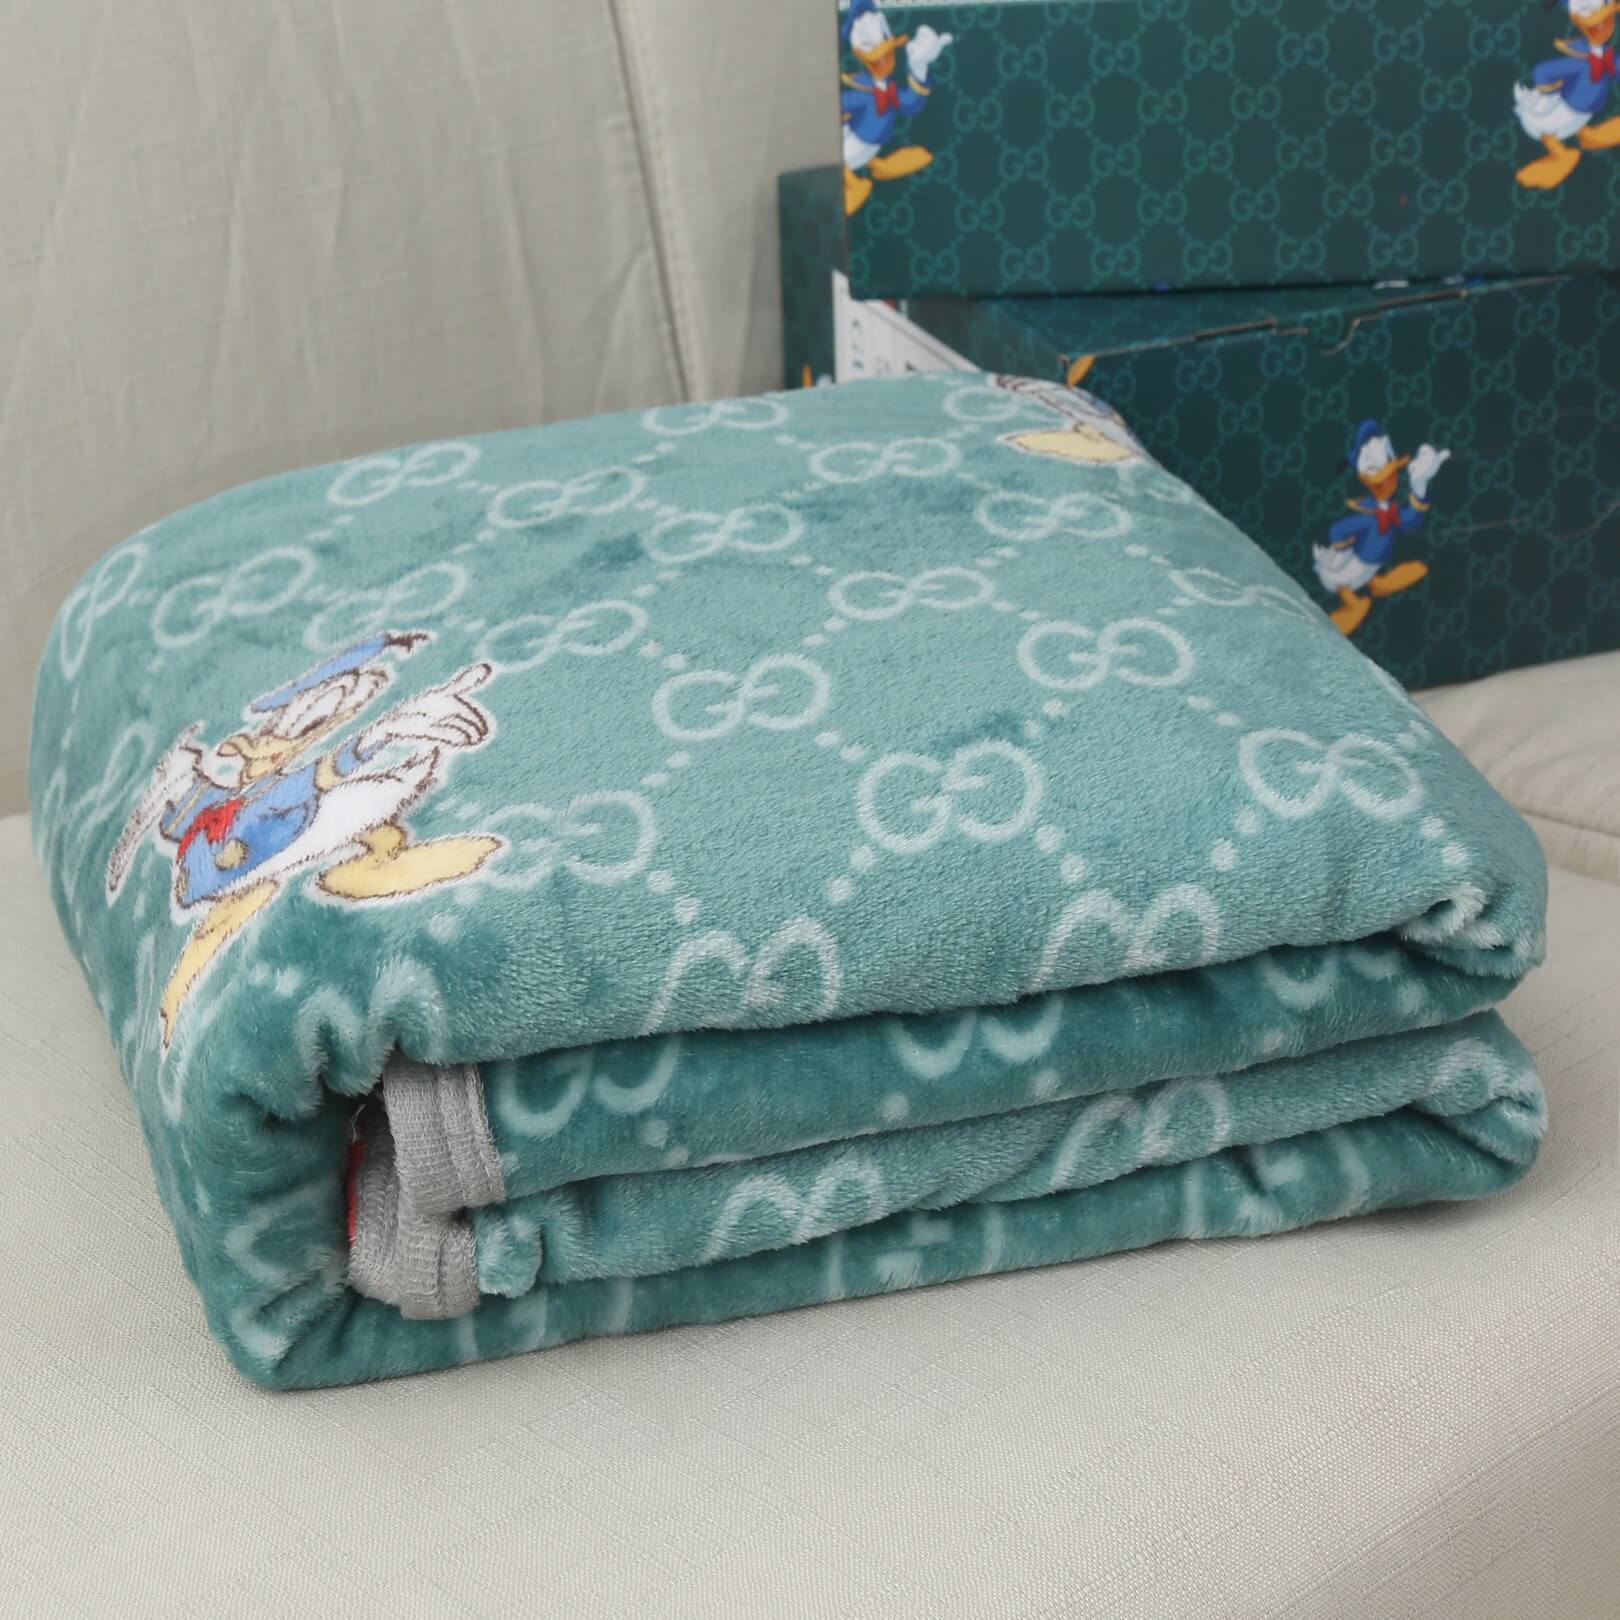 High Quality Branded Blanket 150x200cm with Box Inclusion (Supreme, Guccci,  LV)